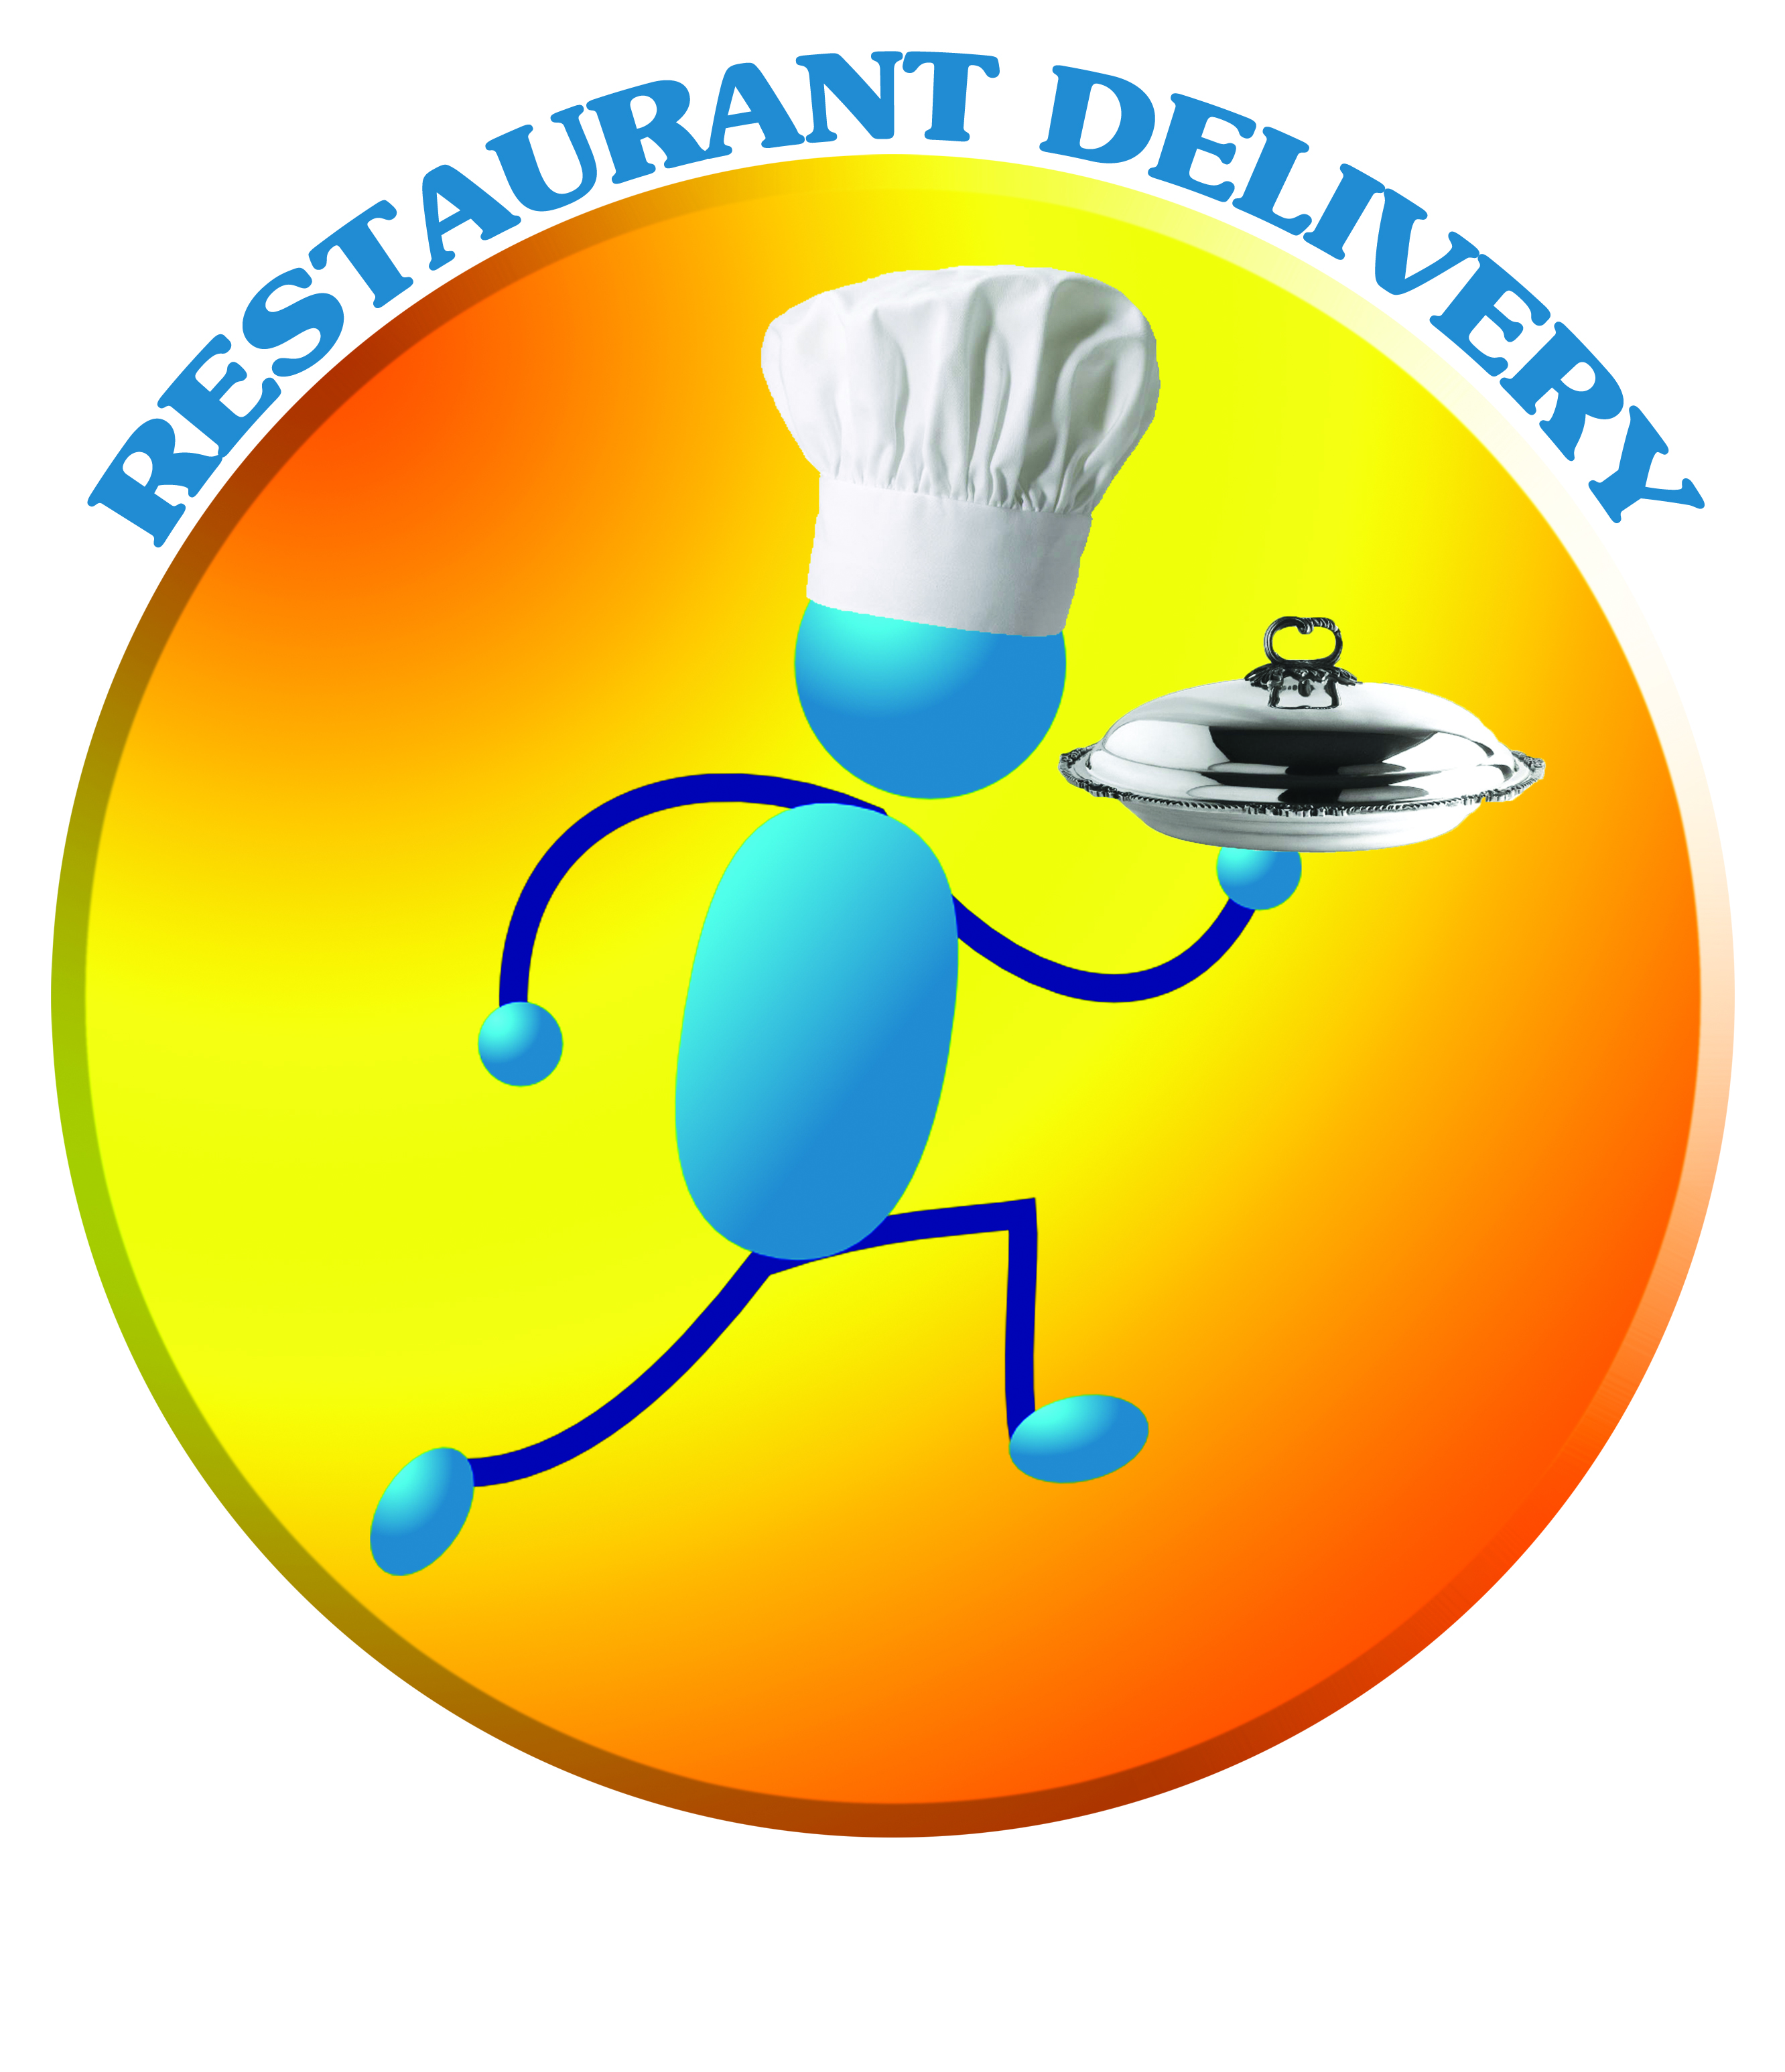 Free Delivery from Myrtle Beach Restaurants Archives - Myrtle Beach on the Cheap